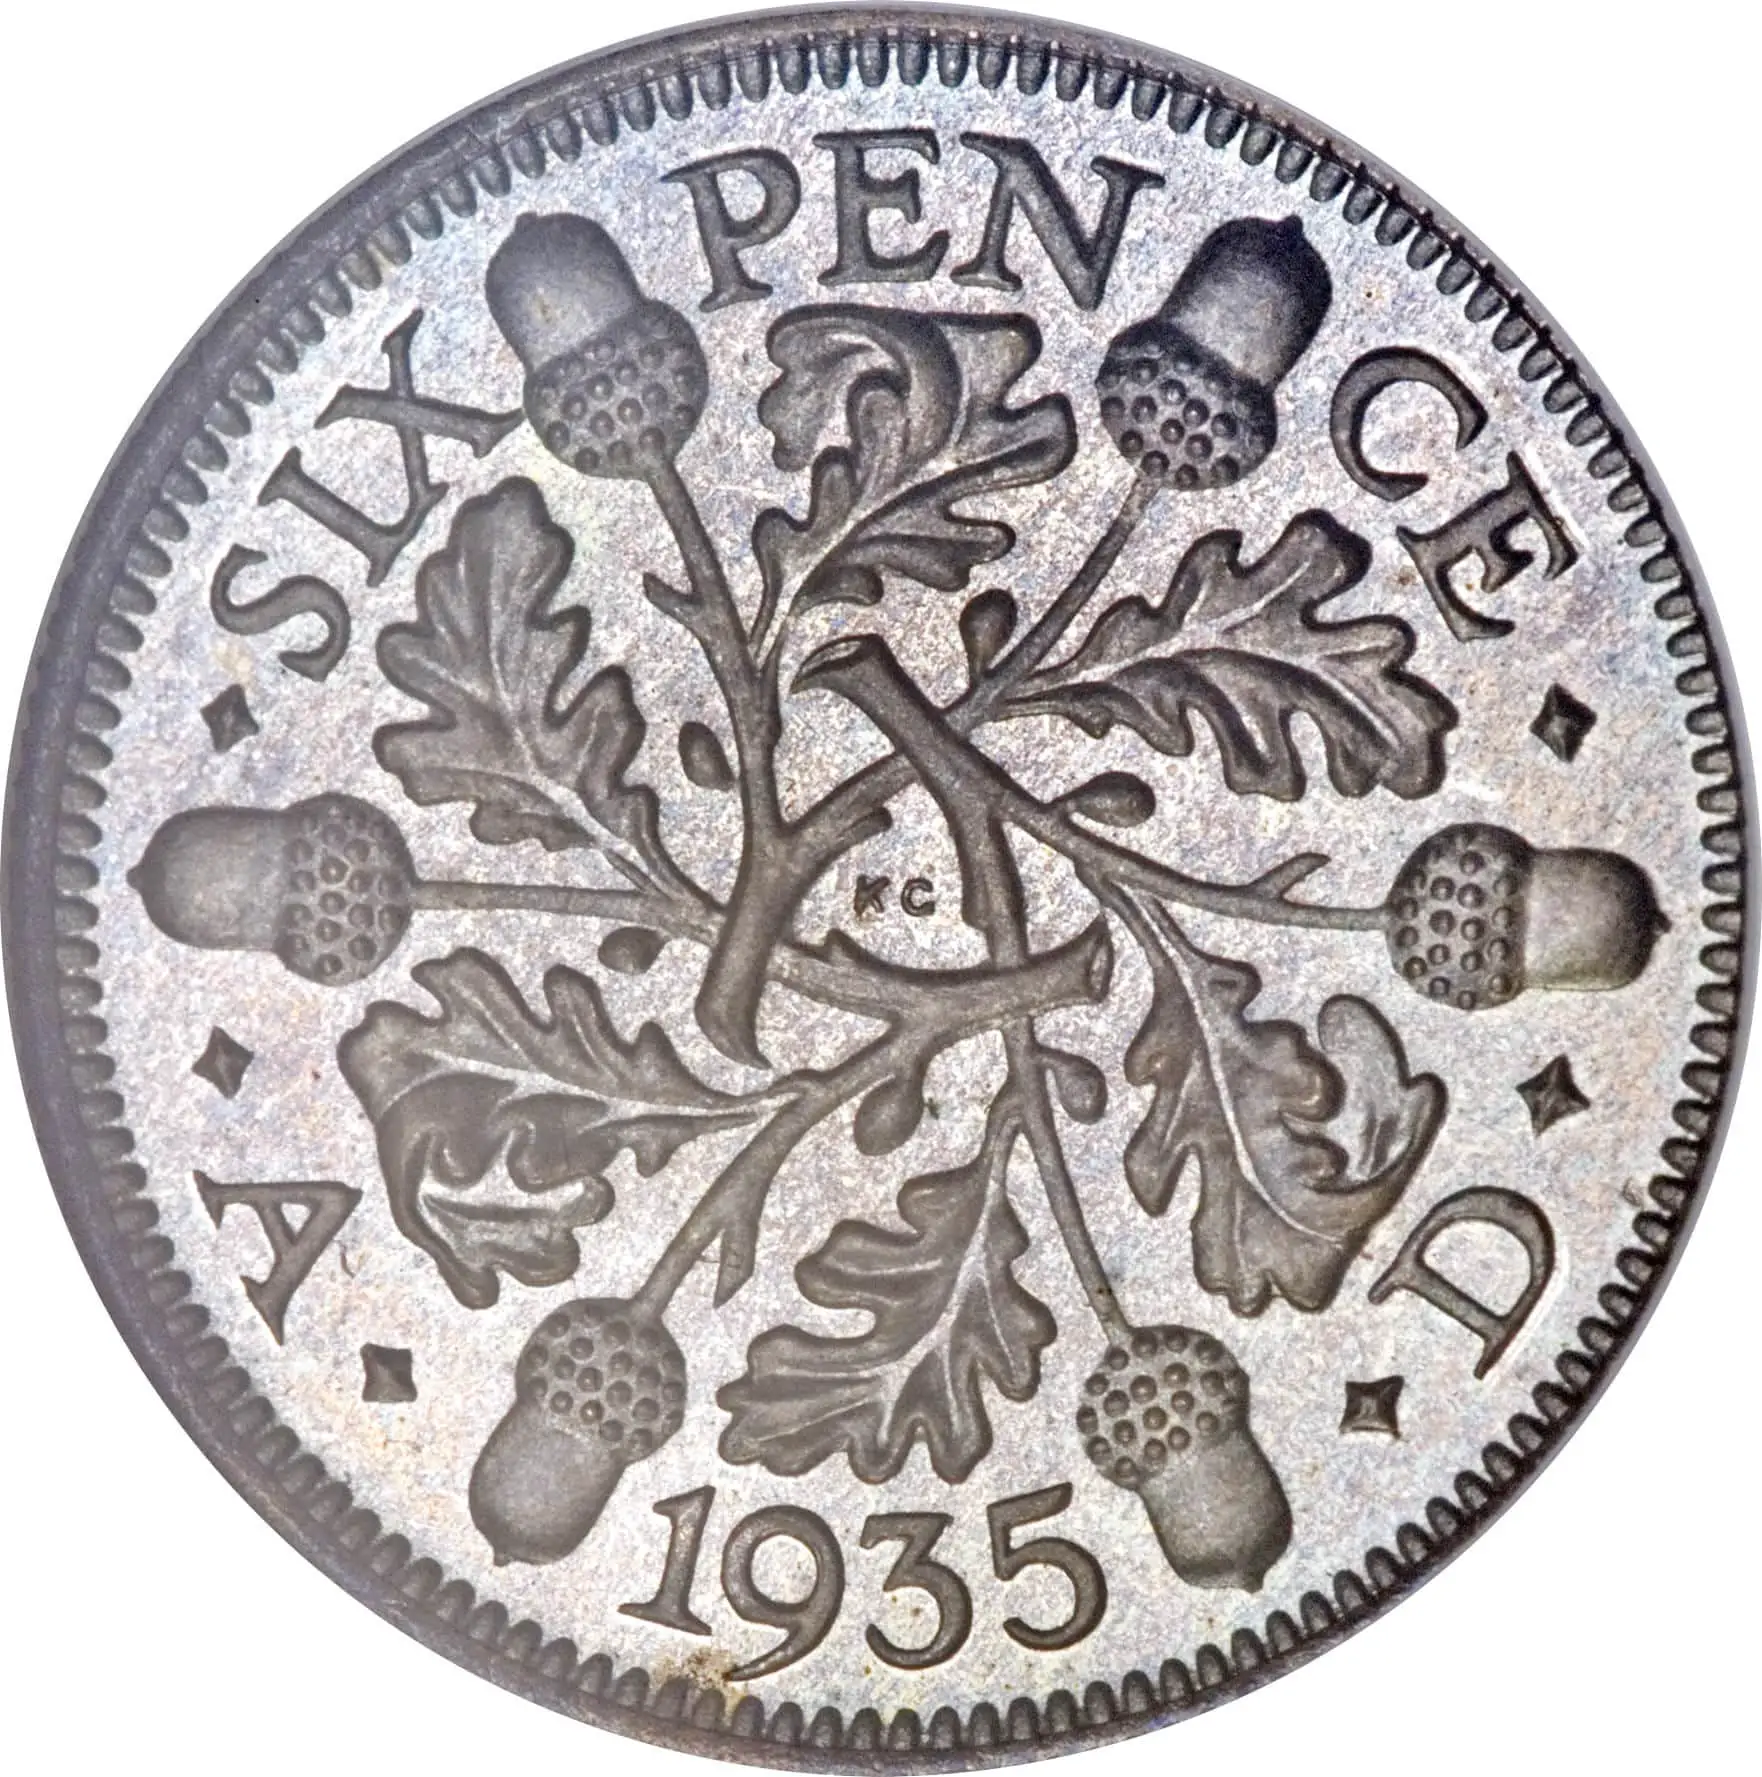 How Much is a Sixpence Worth Today?